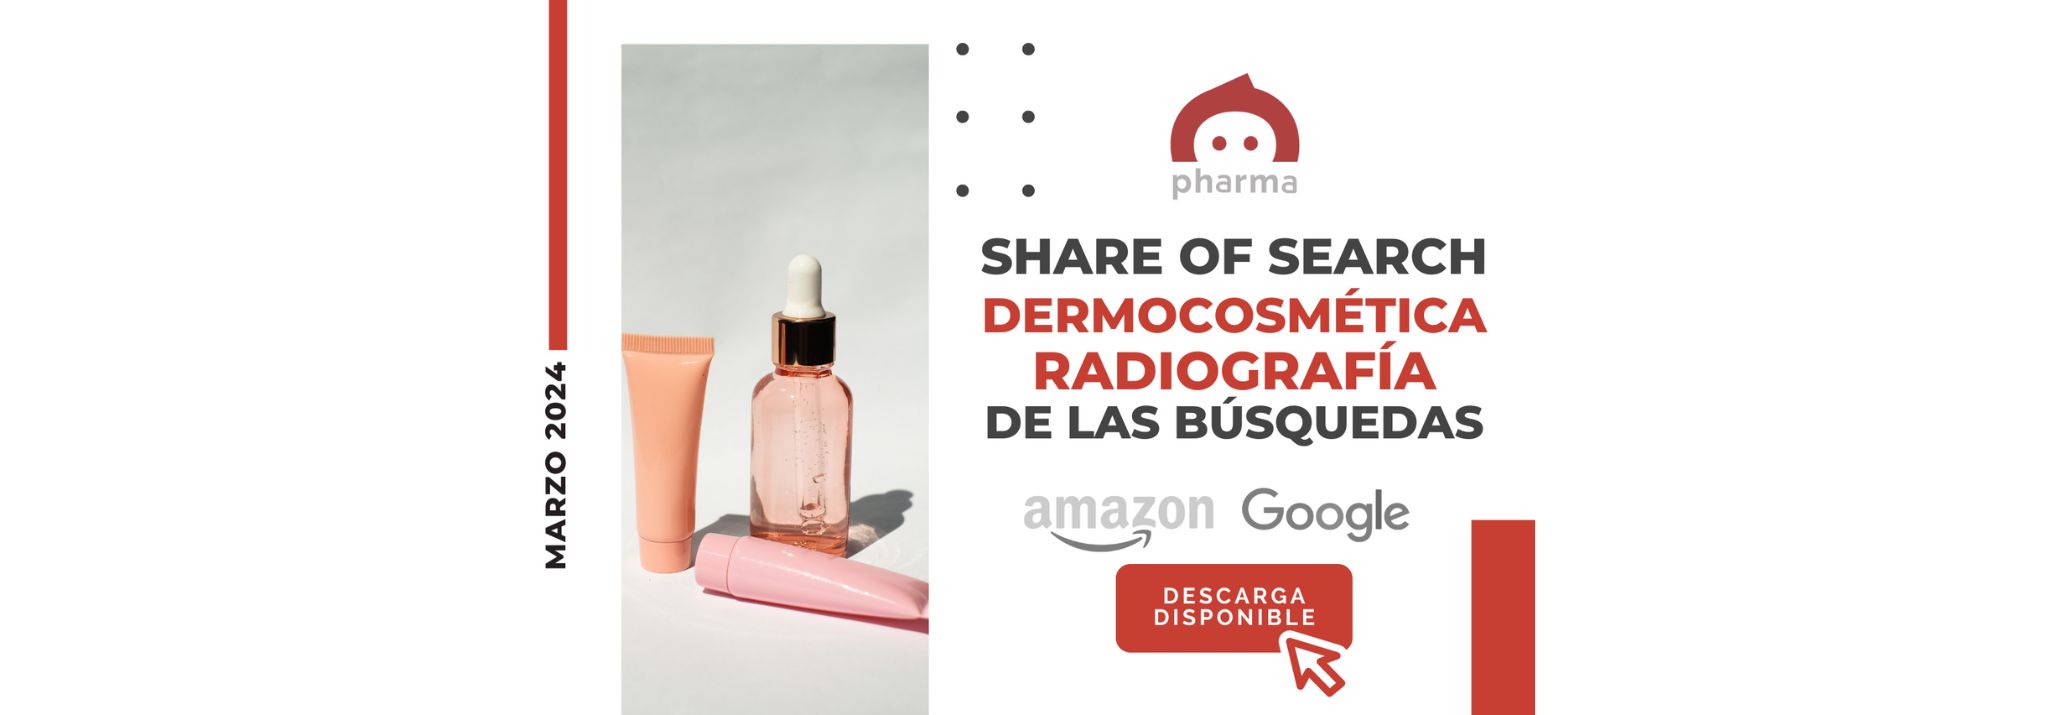 New report on Dermo-Cosmetics: A radiography of Google and Amazon searches